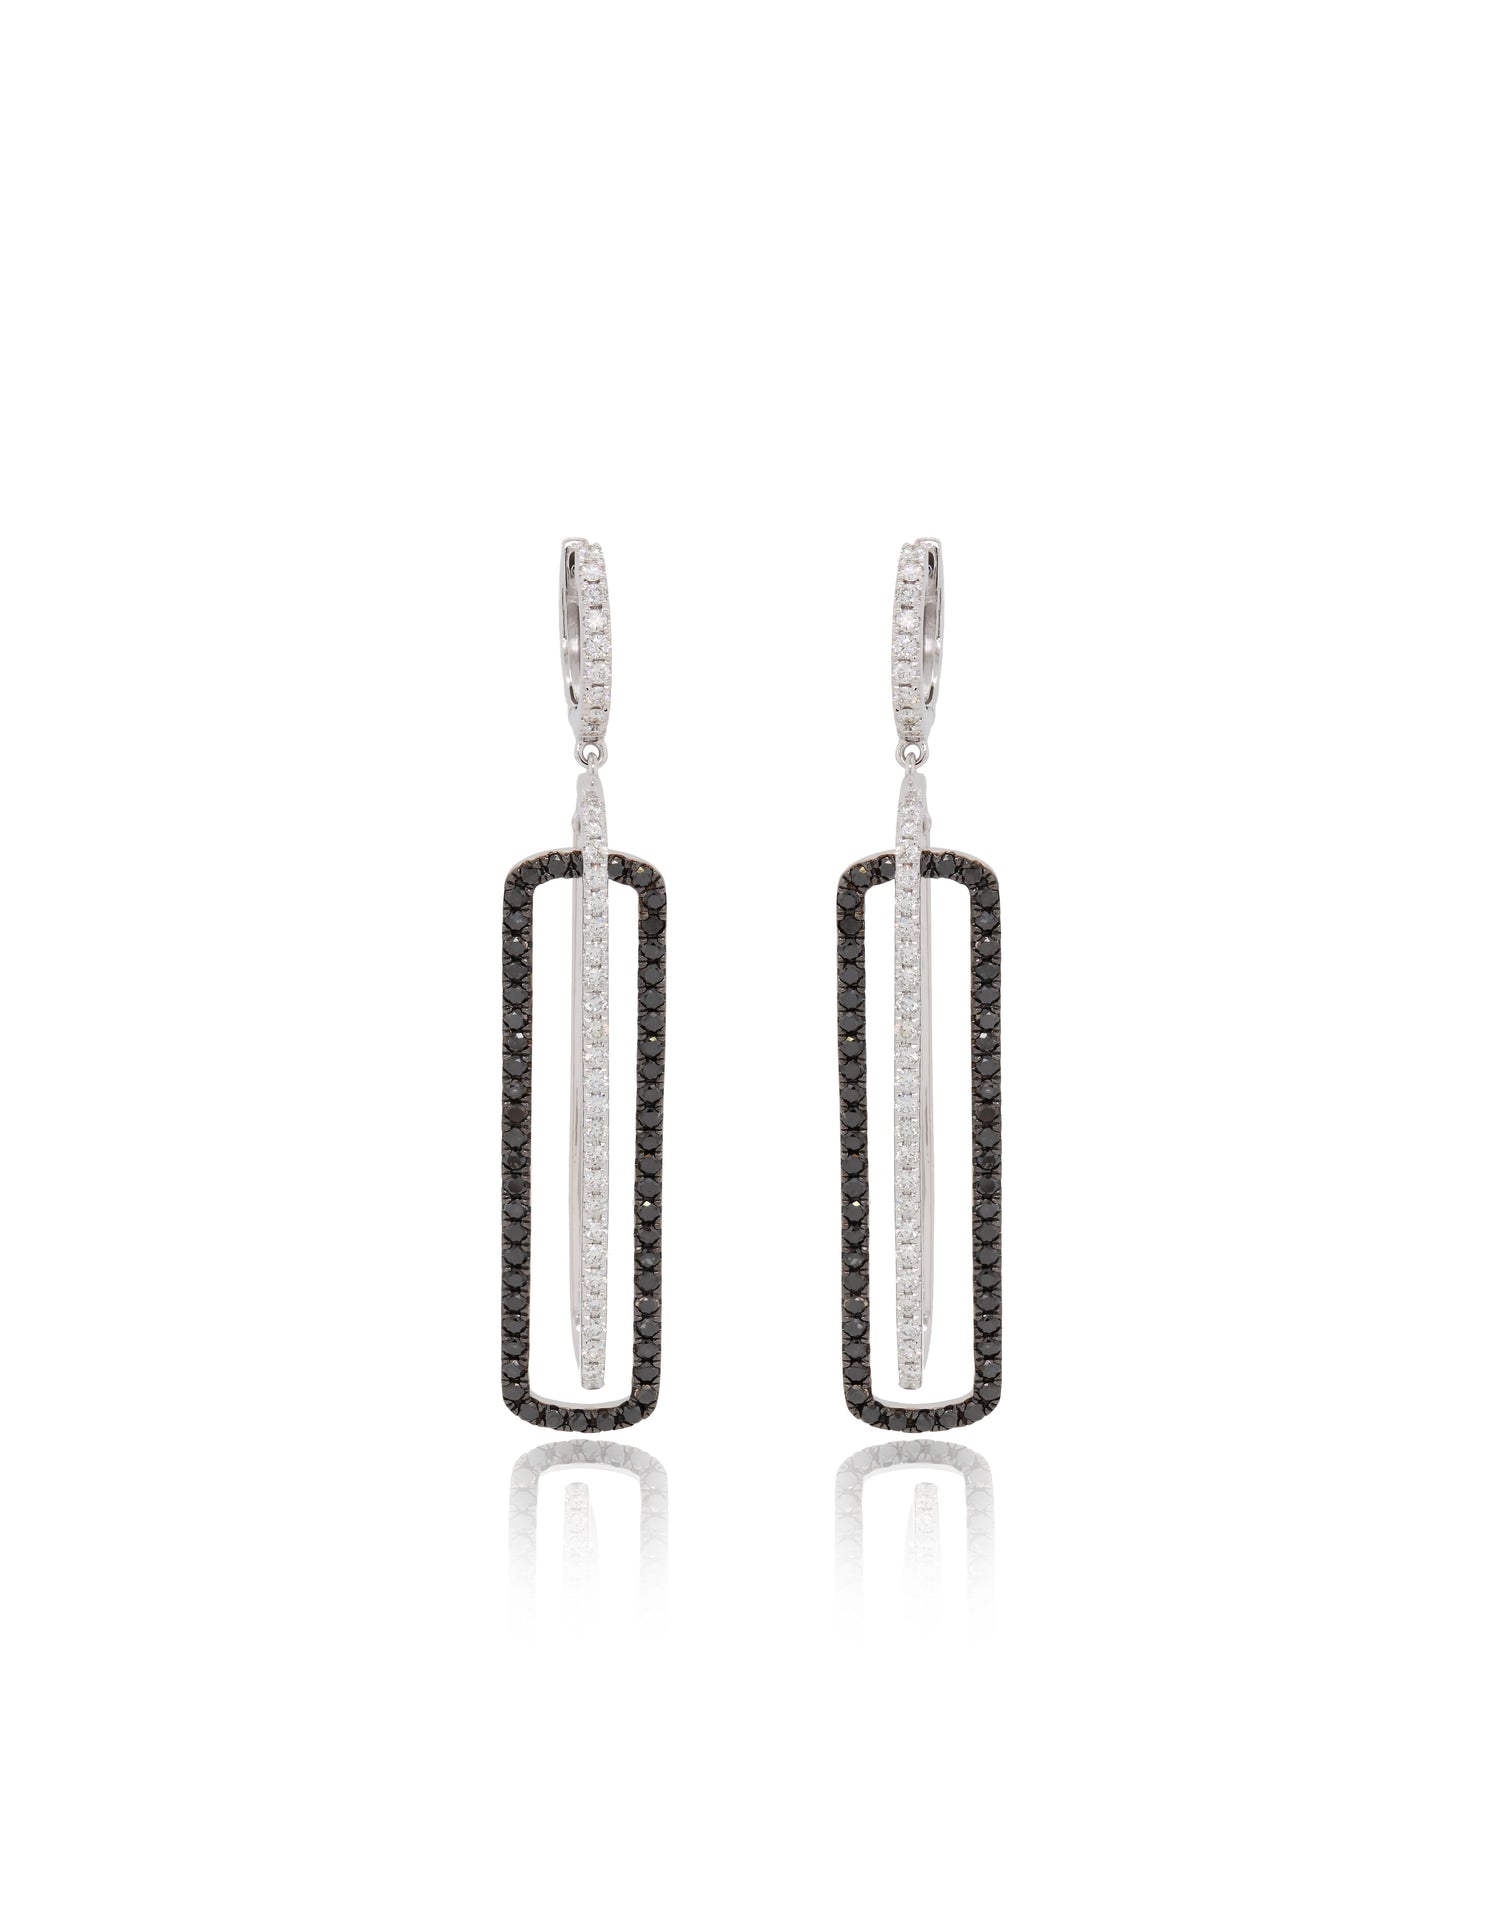 14K white gold rectangle-shaped drop earrings embellished with black and white diamonds